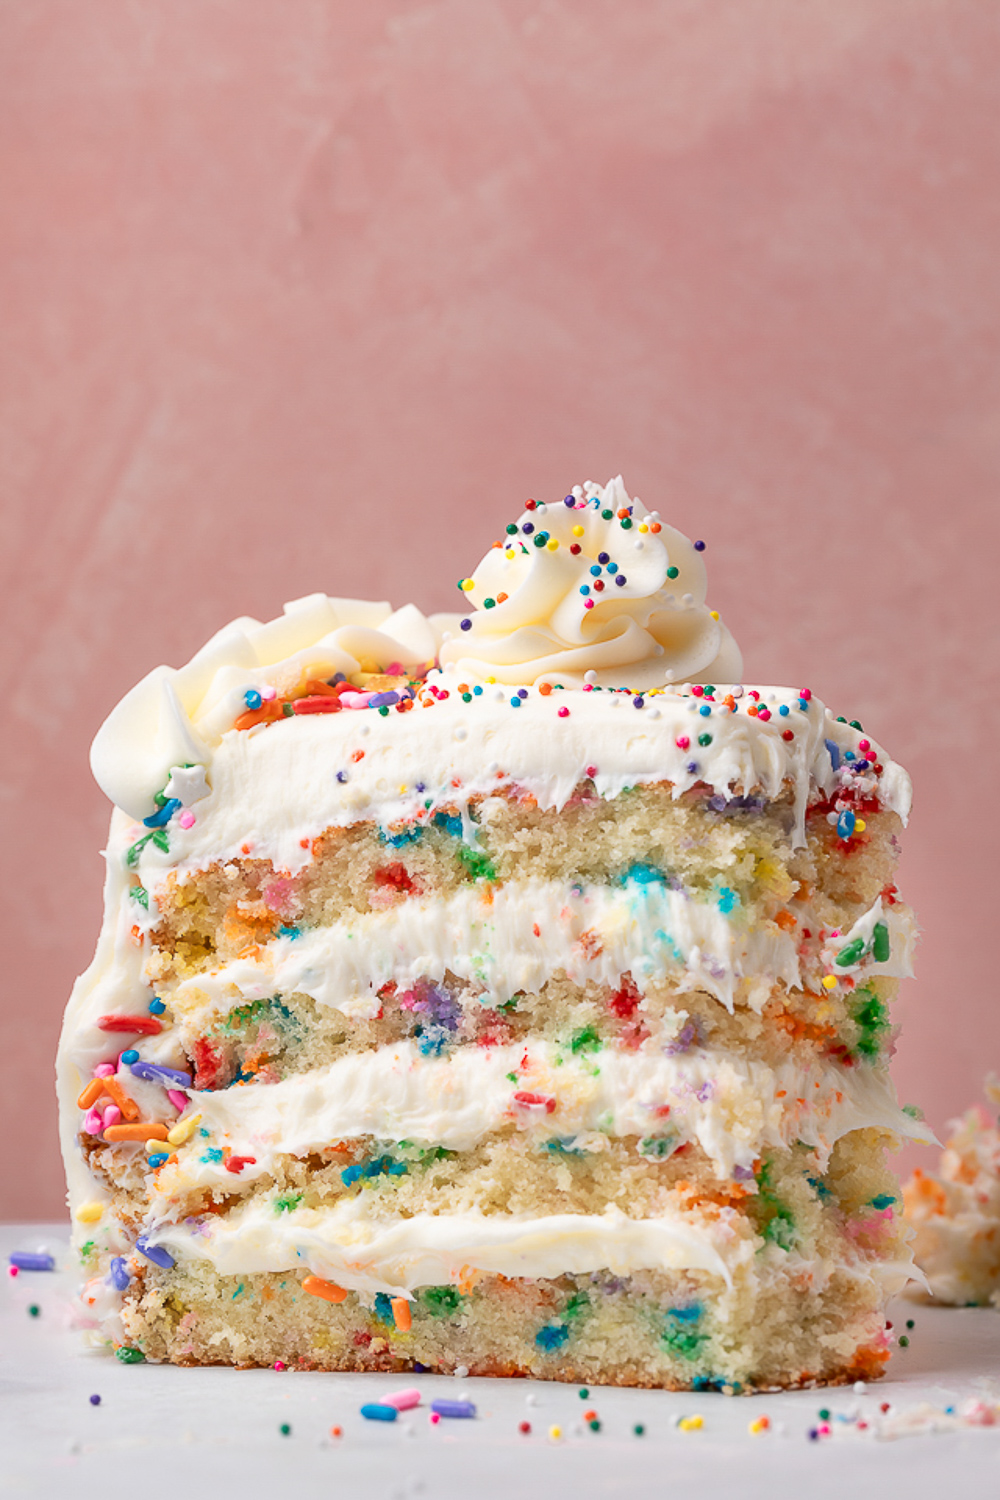 17 Stunning Birthday Cake Recipes for Special Occasions